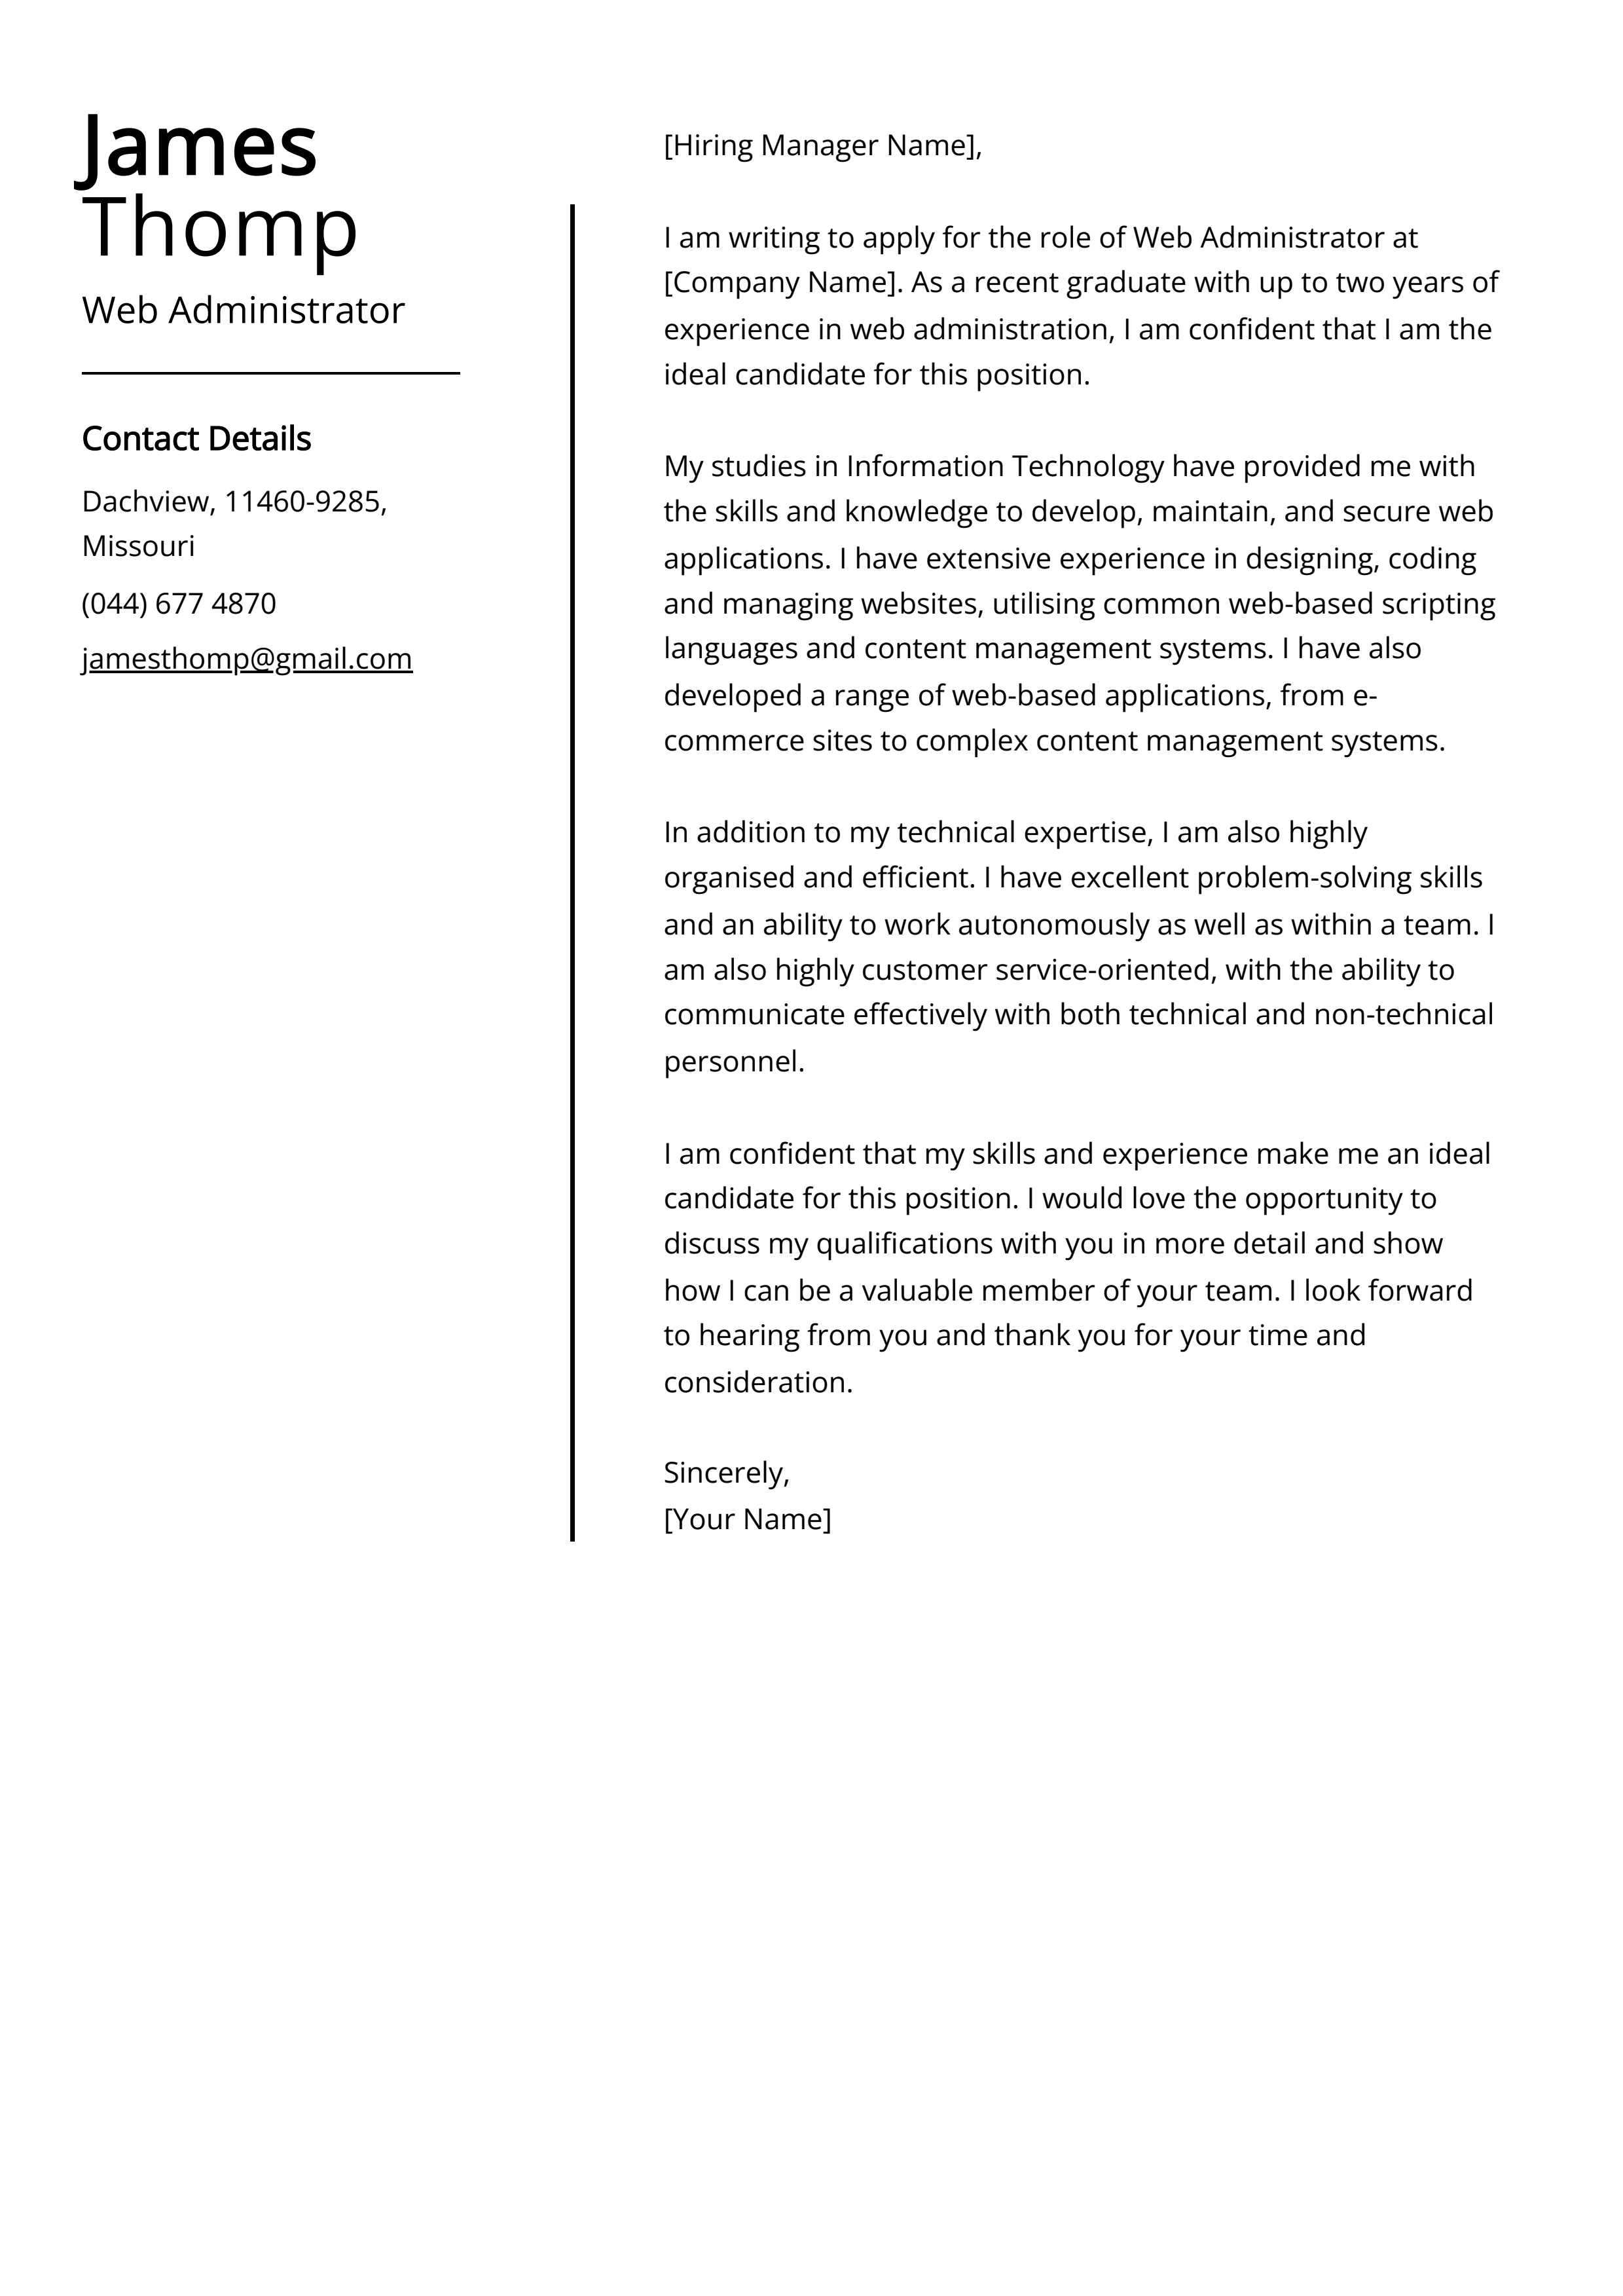 Web Administrator Cover Letter Example